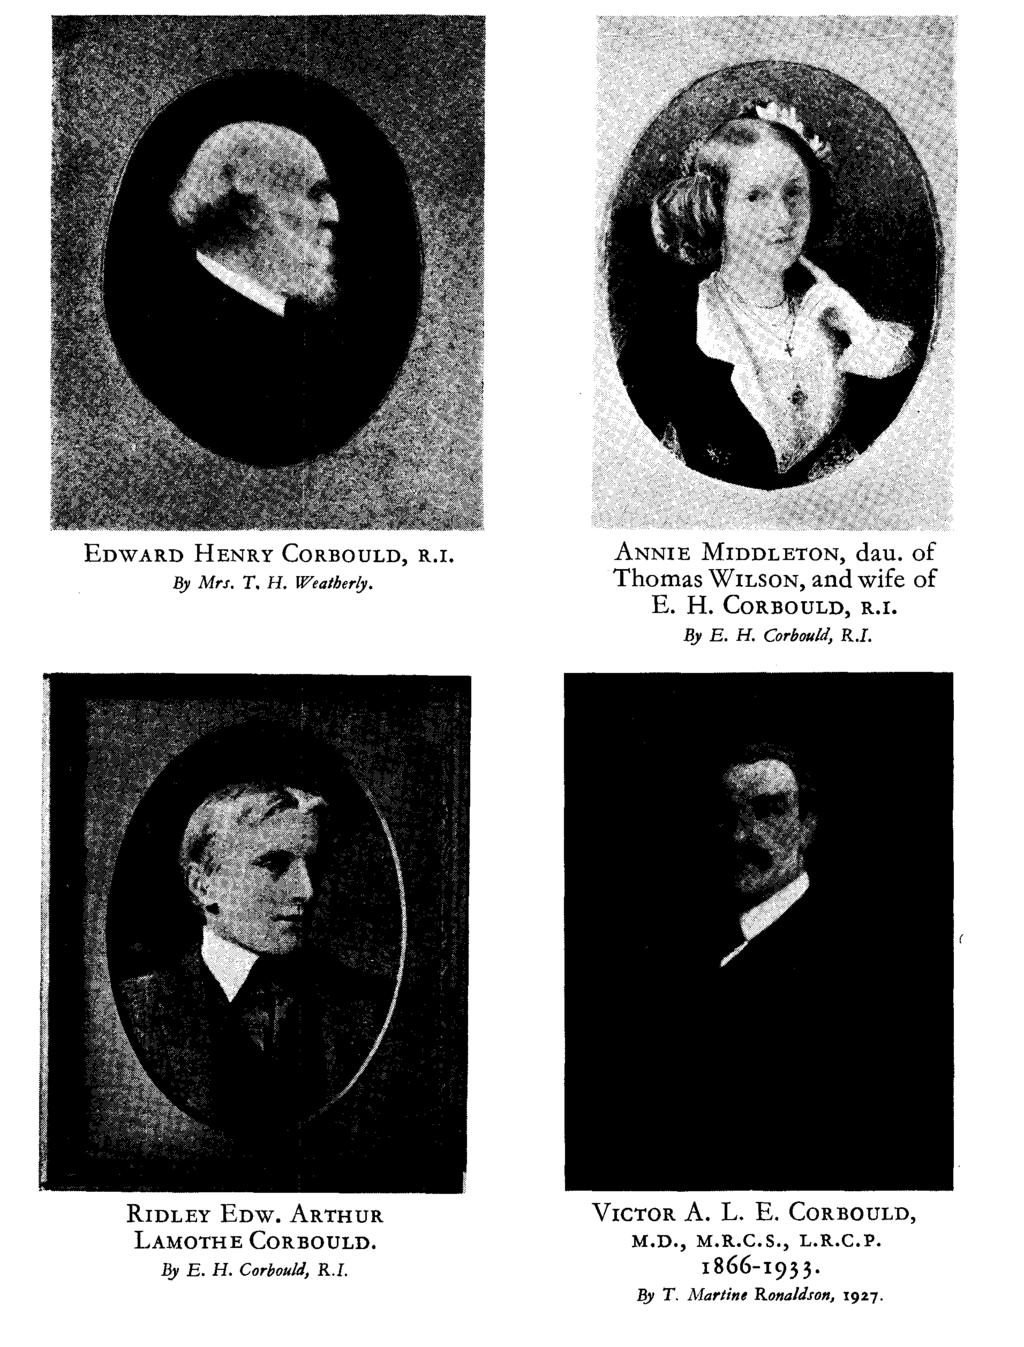 EDWARD HENRY CORBOULD, By Mrs. T. H. Weatberh. R.. ANNE MDDLETON, dau. of Thomas WLSON, and wife of E. H. CORBOULD, R.. By E. H. Corbould, R.